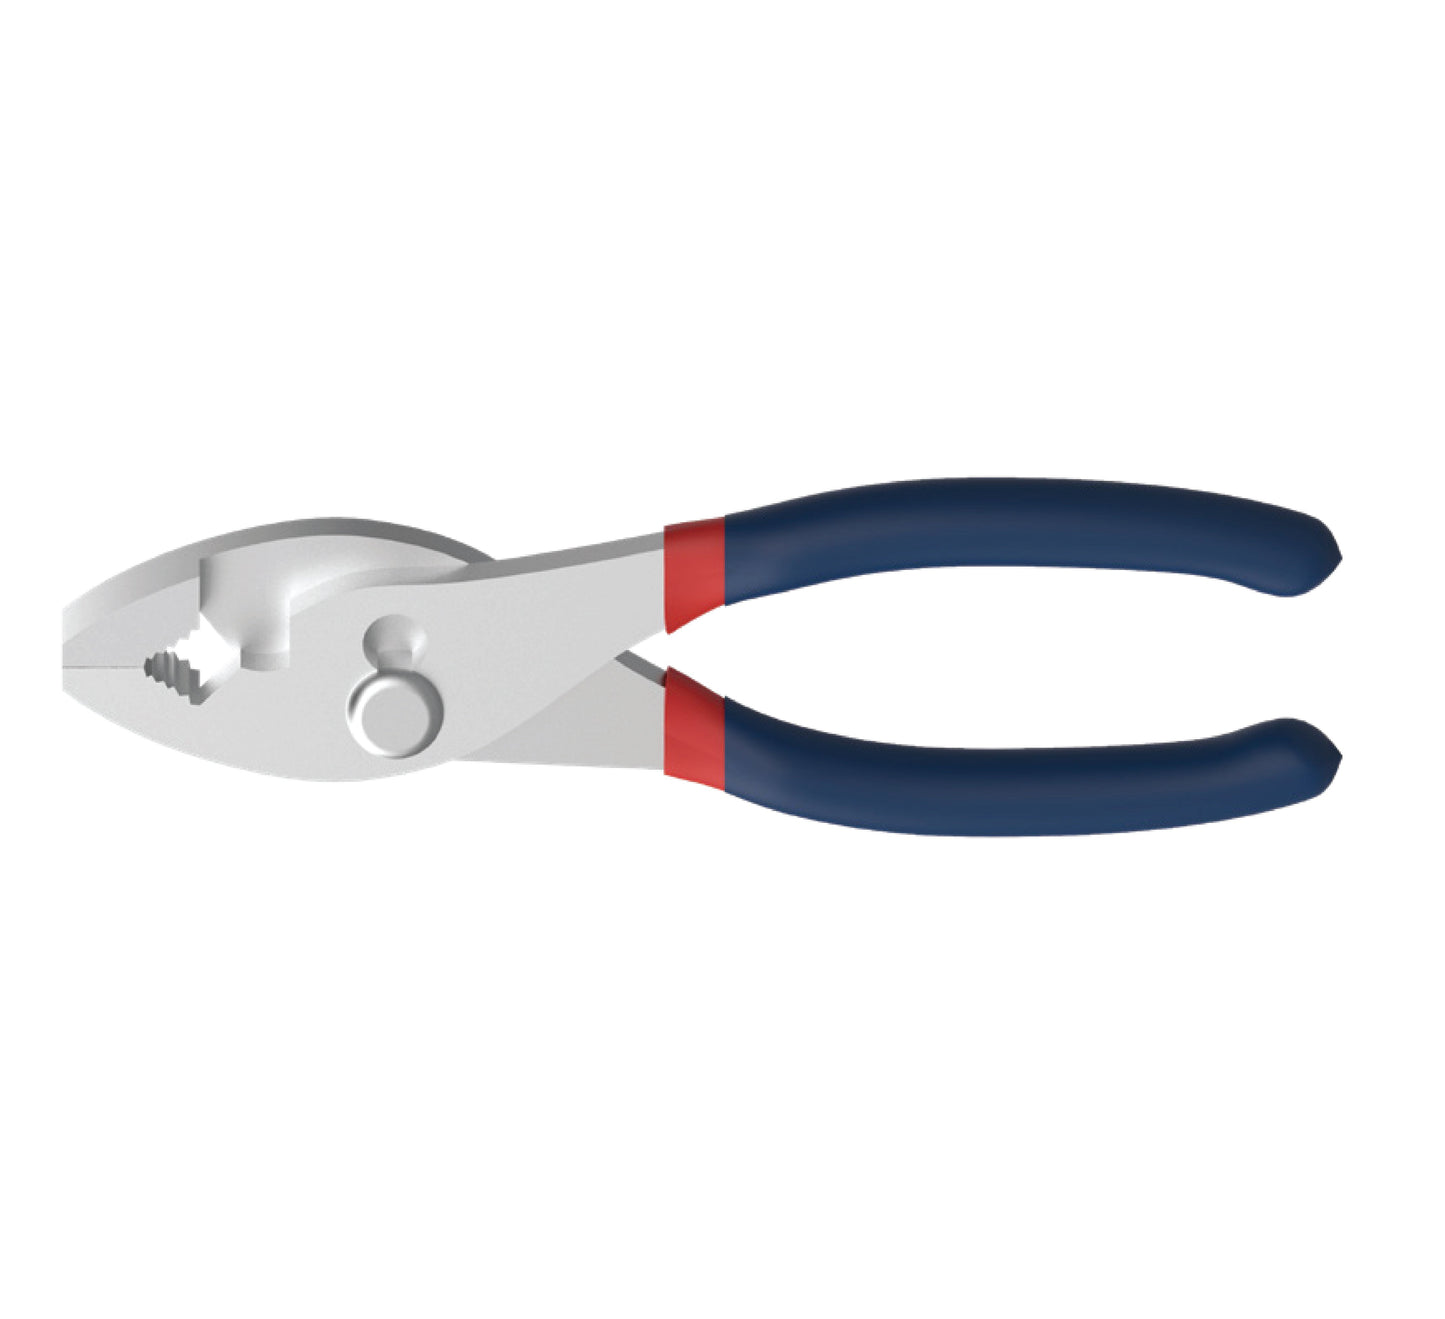 APT SLIP JOINT PLIER 10" CHROME FINISH/ RED BLUE HANDLE-NEW APT PP CARD WITH RED STRAP AH1232740-10